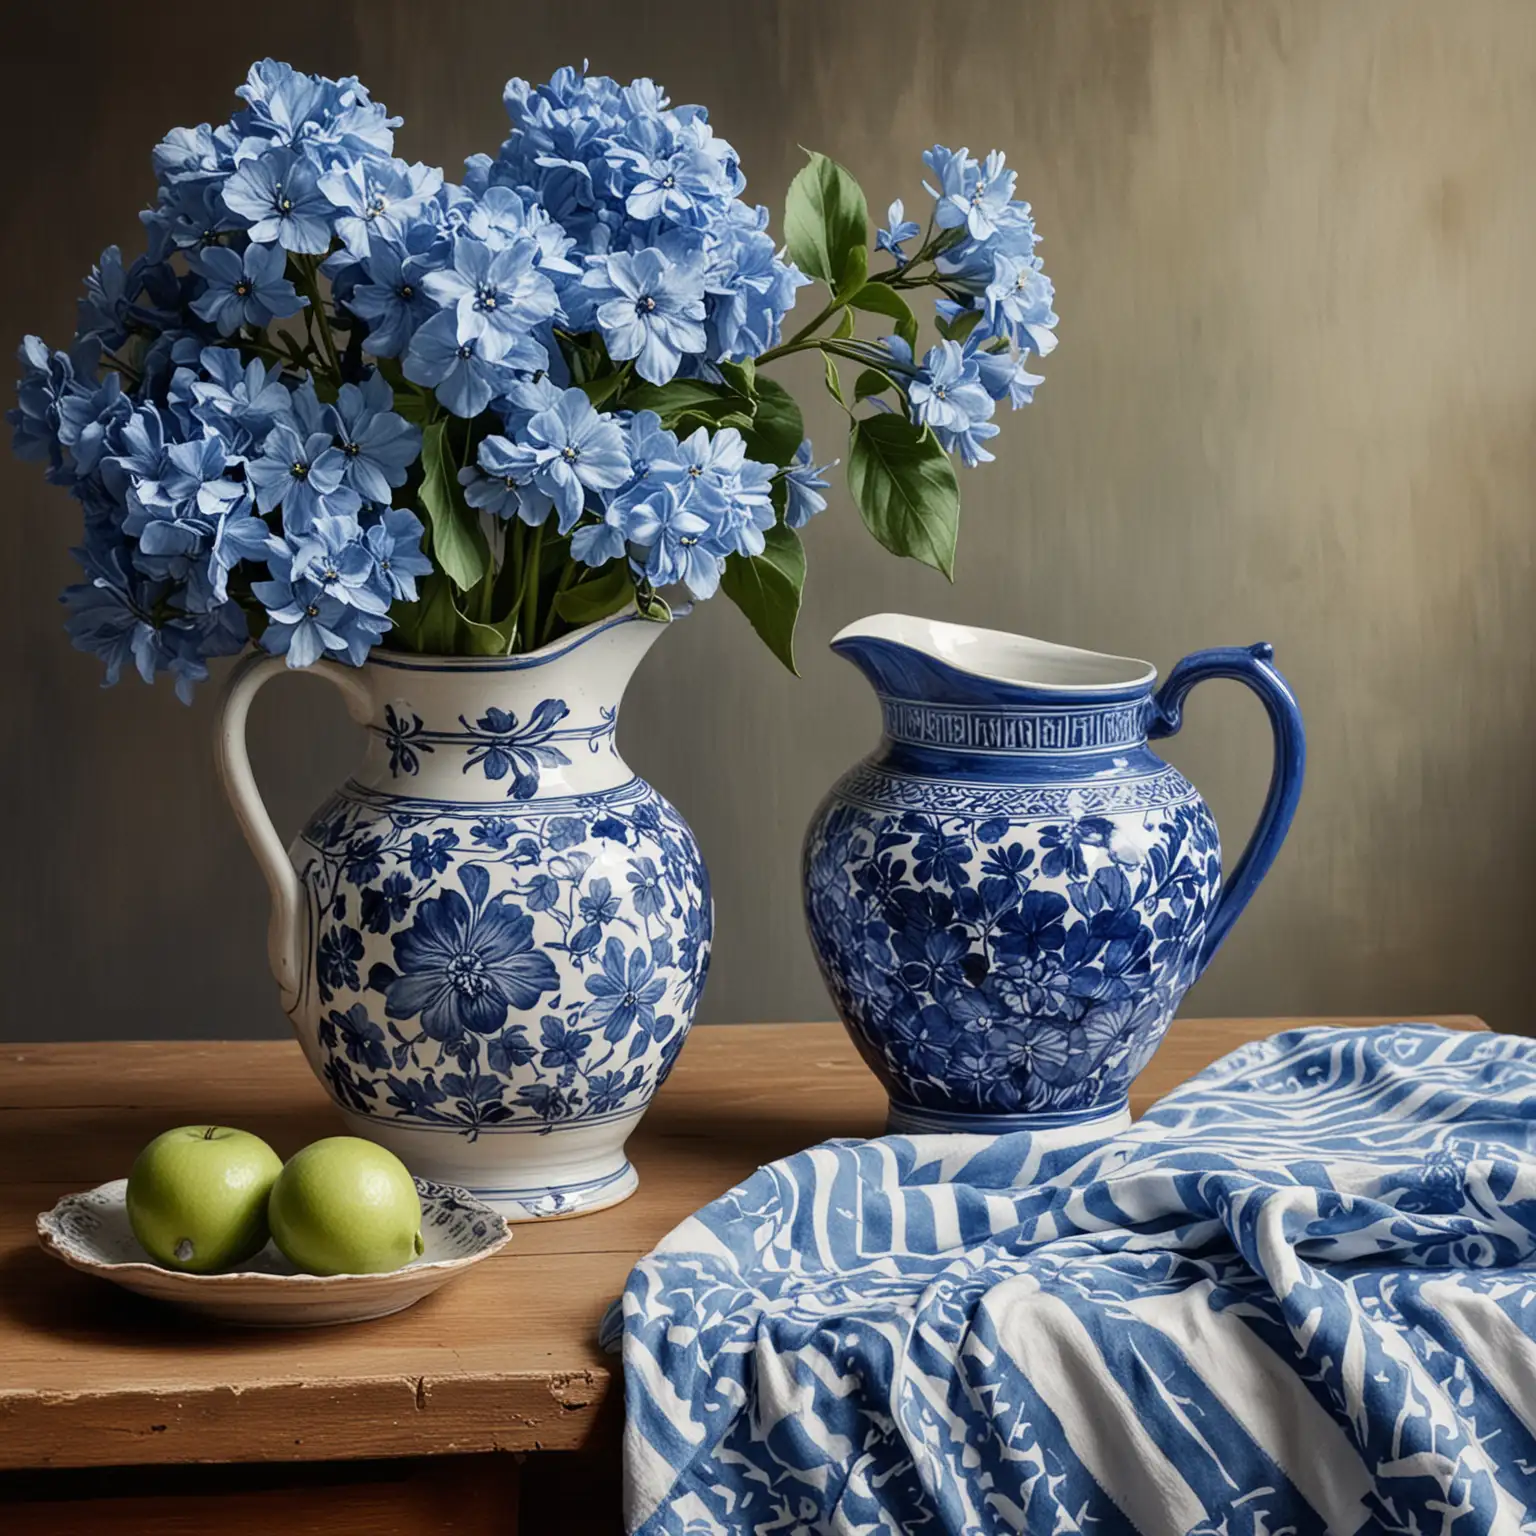 A STILL LIFE PAINTING OF A BLUE AND WHITE PITCHER WITH BLUE HYDRANGES AND ANOTHER SMALL BLUE AND WHITE PIECE OF POTTERY ON THE TABLE. SHOW A CLOTH ON THE TABLE